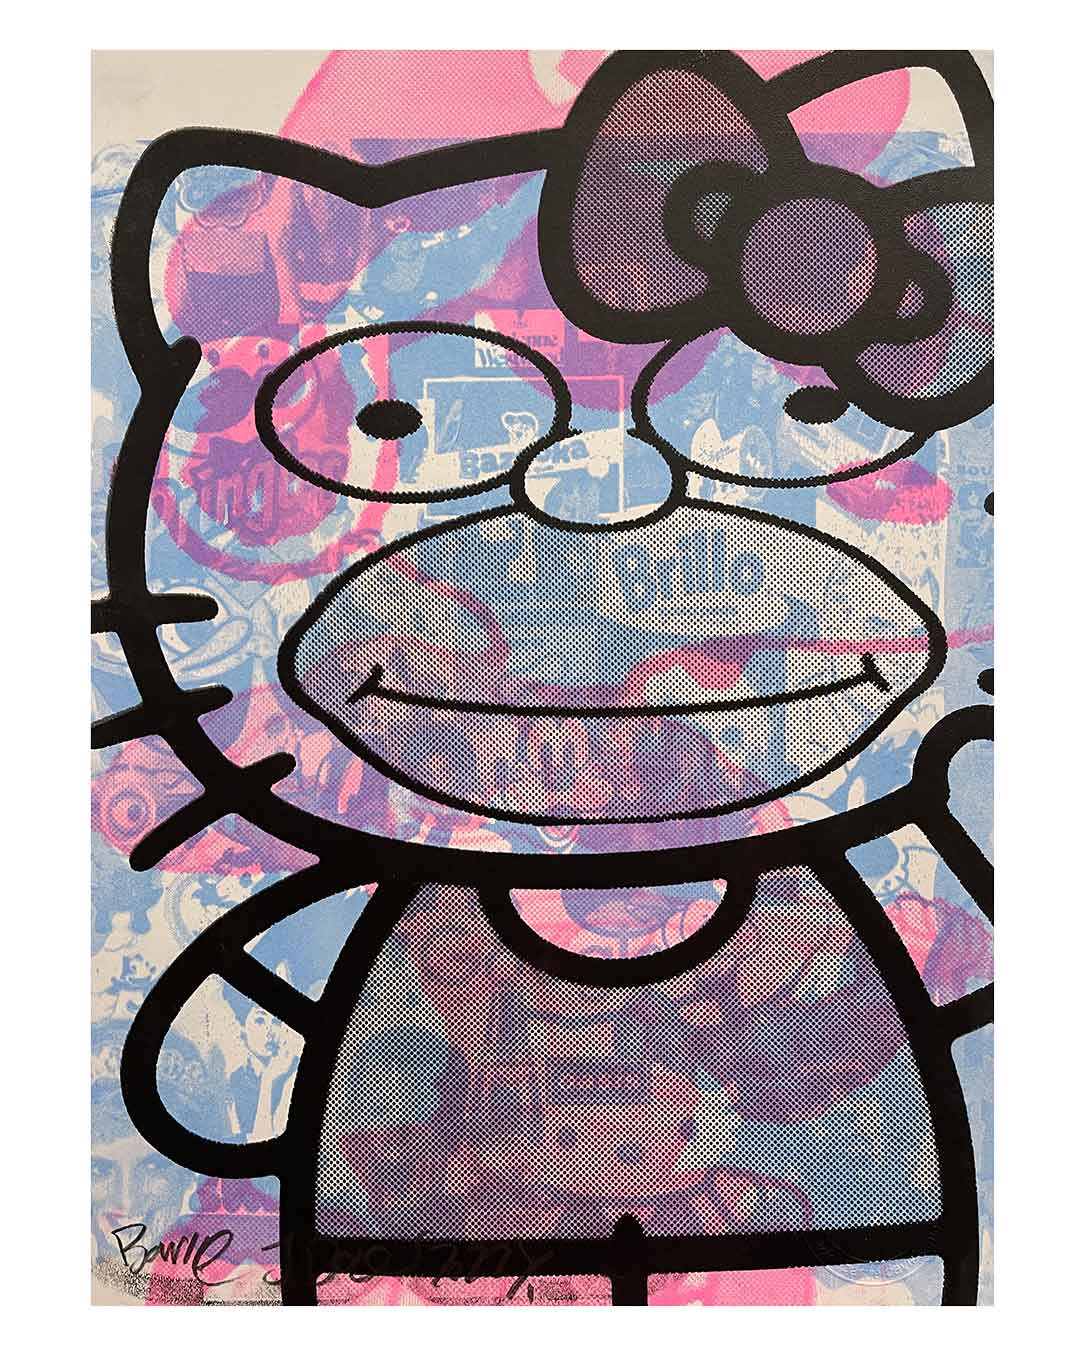 Mini Meow Homer Mix Print by Barrie J Davies 2022 - unframed Silkscreen print on paper (hand finished) edition of 1/1 - A2 size 42cm x 59.4cm.